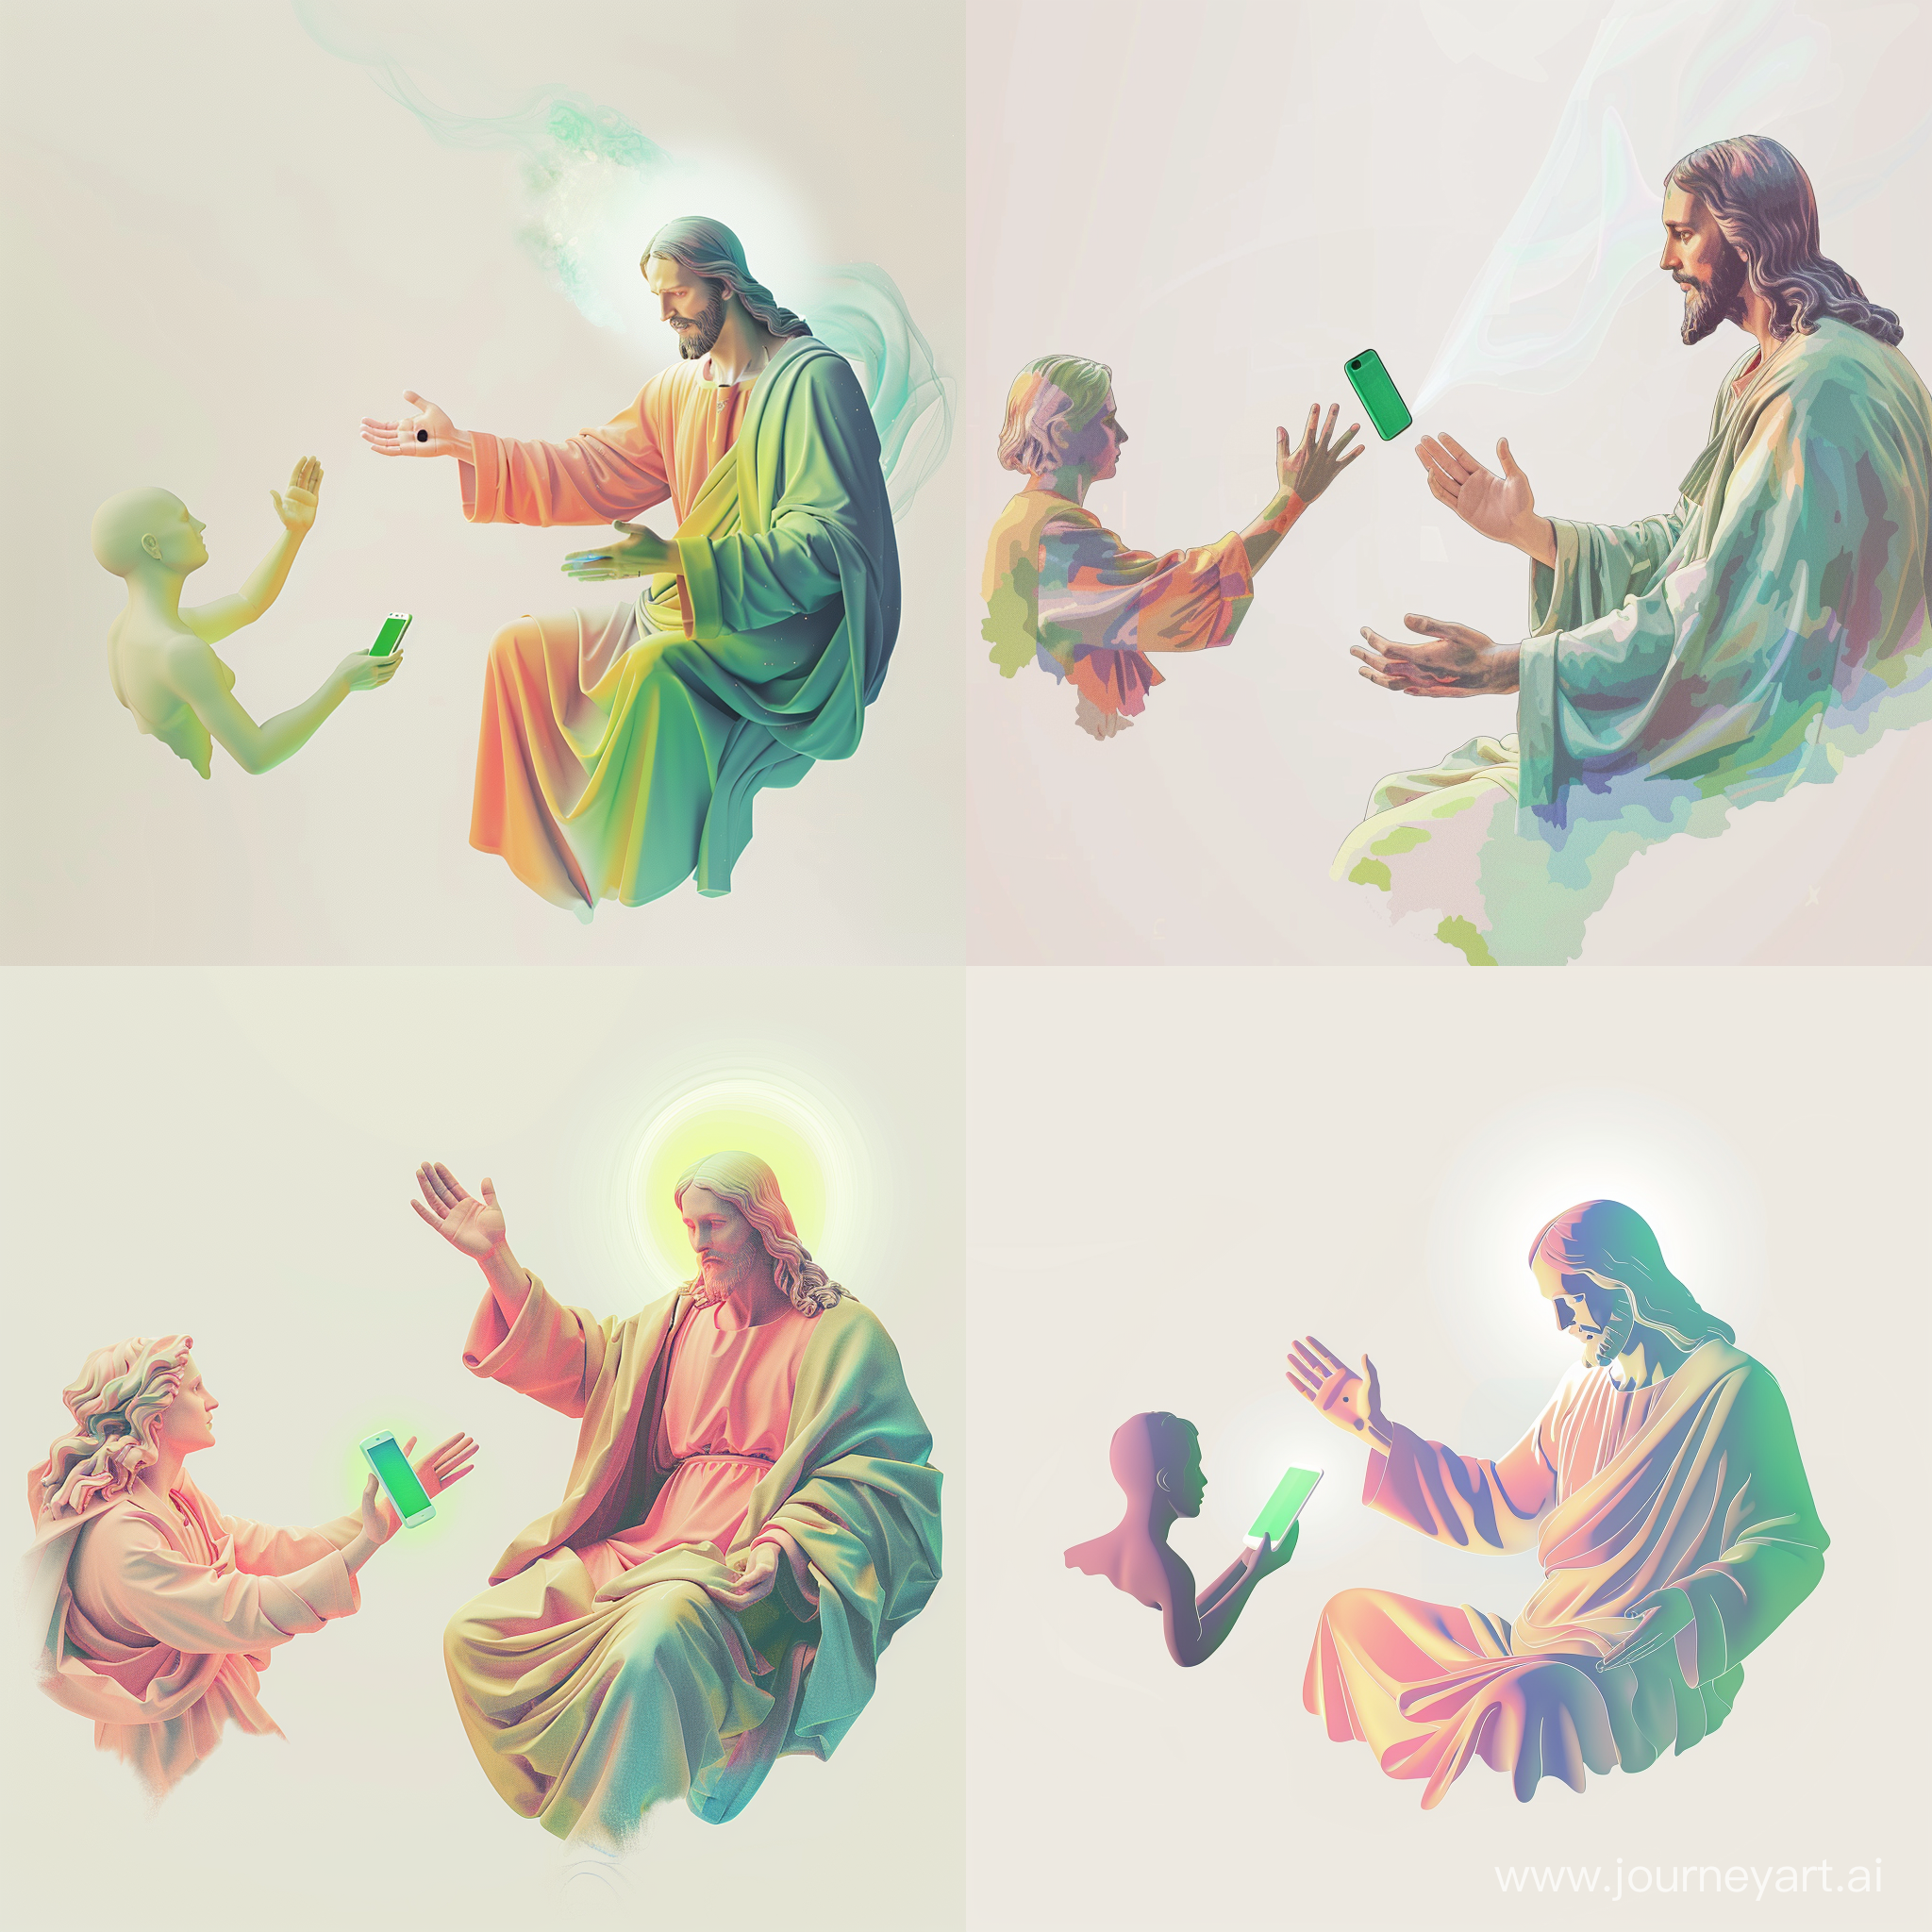 The overall color palette should consist of soft hues with white (#FFFFFF) background and no corners.

In the right center of the image is a stylized figure of Jesus Christ, seated and dressed in a simple robe filled with calming colors. His right arm is extended towards the left side of the image, his hand reaching out in a gesture that mimics the "The Creation of Adam."

His face is gently illuminated, with a soft, warm light creating a subtle halo around his head, giving a sense of divinity. The face should be peaceful and inviting, with a kind gaze directed towards the left side of the image, but still clearly visible and identifiable.

On the left side of the image, we have a smaller, non-detailed figure representing a person. The figure is reaching towards Jesus Christ, their hand also mimicking the iconic gesture from "The Creation of Adam". This figure is simple and non-detailed, it could be depicted in mid-motion, reaching out towards the figure of Jesus, indicating a sense of seeking or reaching out for help.

The two figures are separated by a subtle gradient of light, originating from the figure of Jesus, hinting at a transfer of wisdom or healing energy from Jesus to the person.

Between their hands, floating in mid-air, is a green smartphone. The phone serves as a bridge between the two figures, indicating the medium of their communication and a gift from Jesus to humanity.

In essence, the image is a modern, stylized representation of Jesus Christ as a therapist, interacting with a person seeking help, set against a serene, calming background.